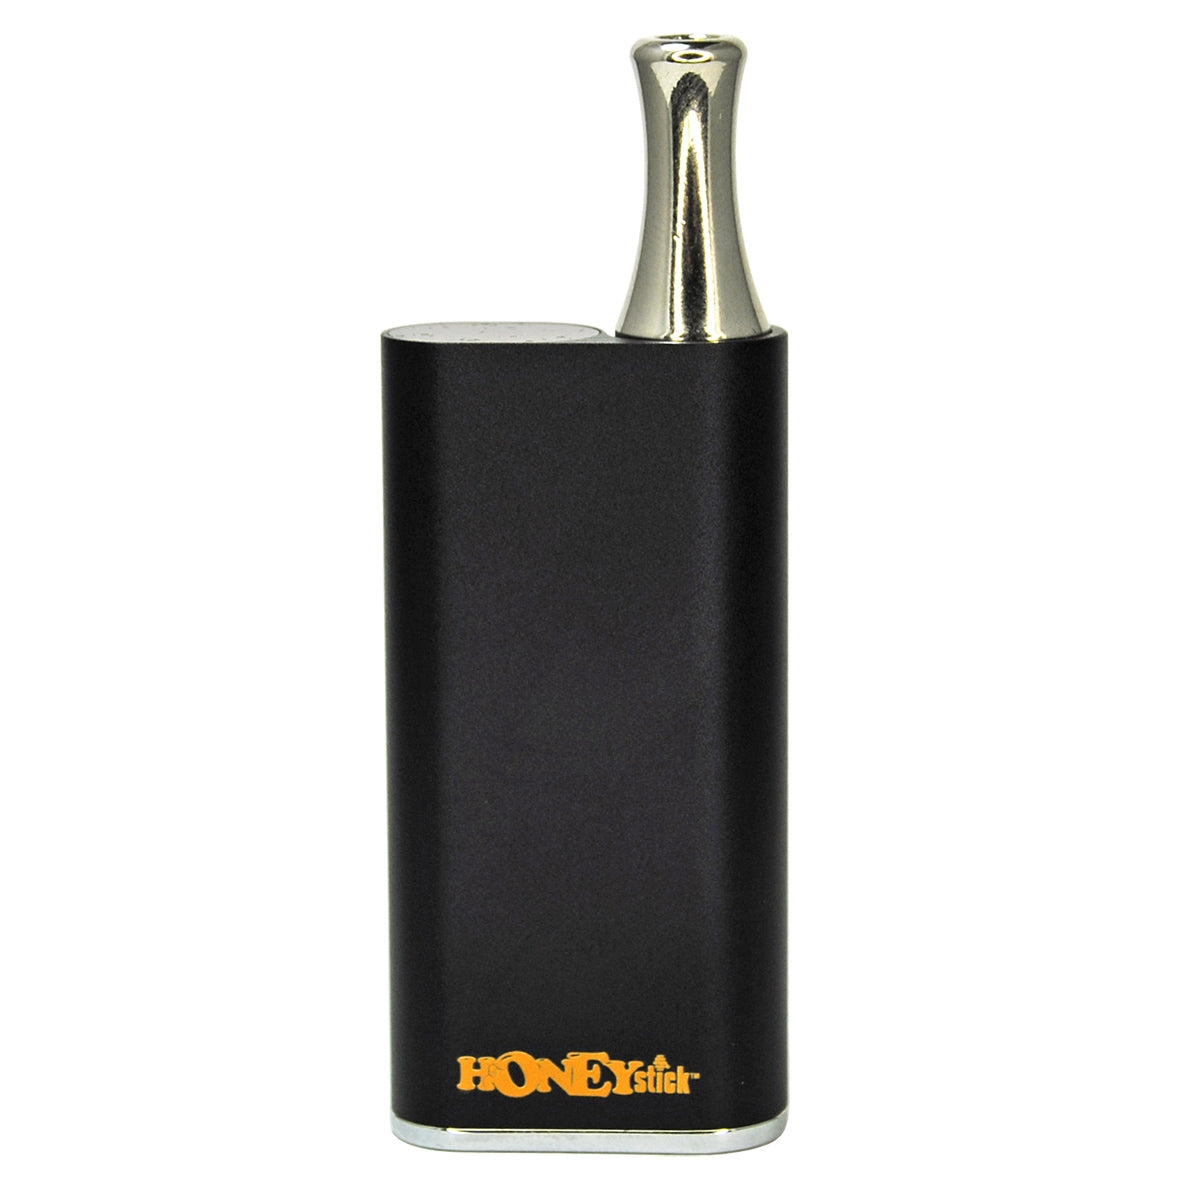 BeeBox Auto-Draw Oil Vaporizer for 510 Thread Cartridges